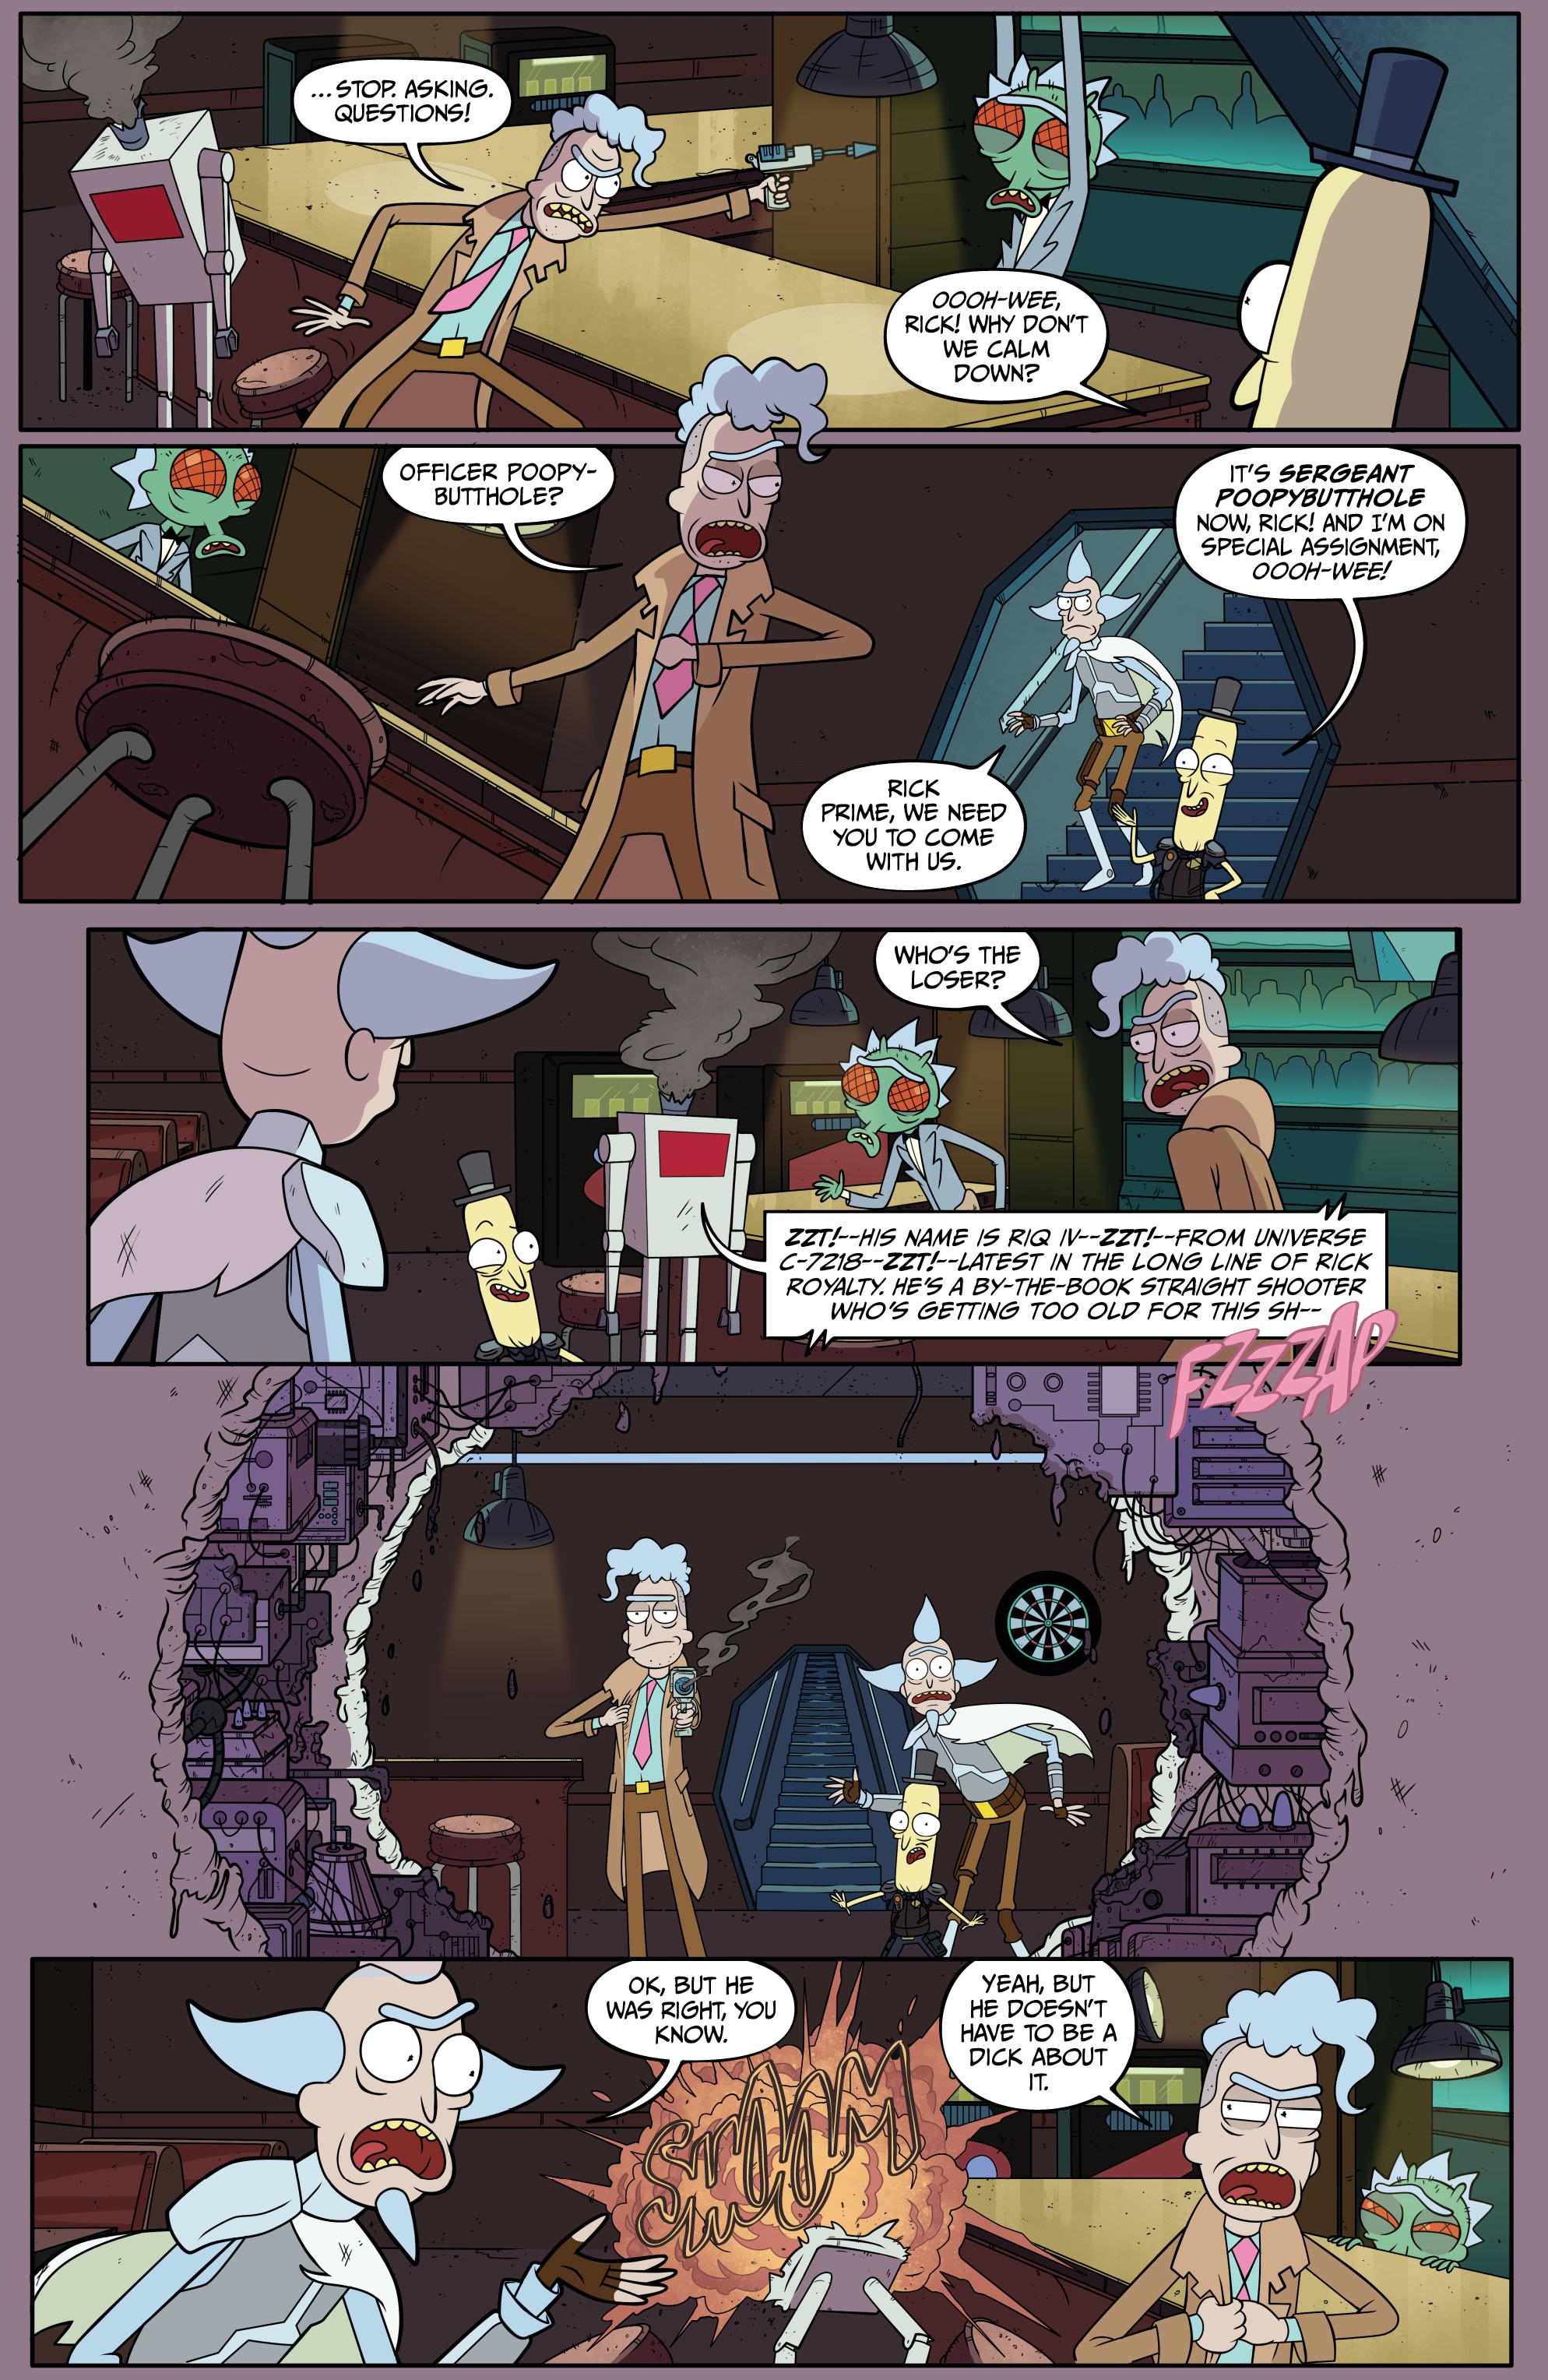 Rick and Morty Presents: The Council of Ricks (2020): Chapter 1 - Page 5